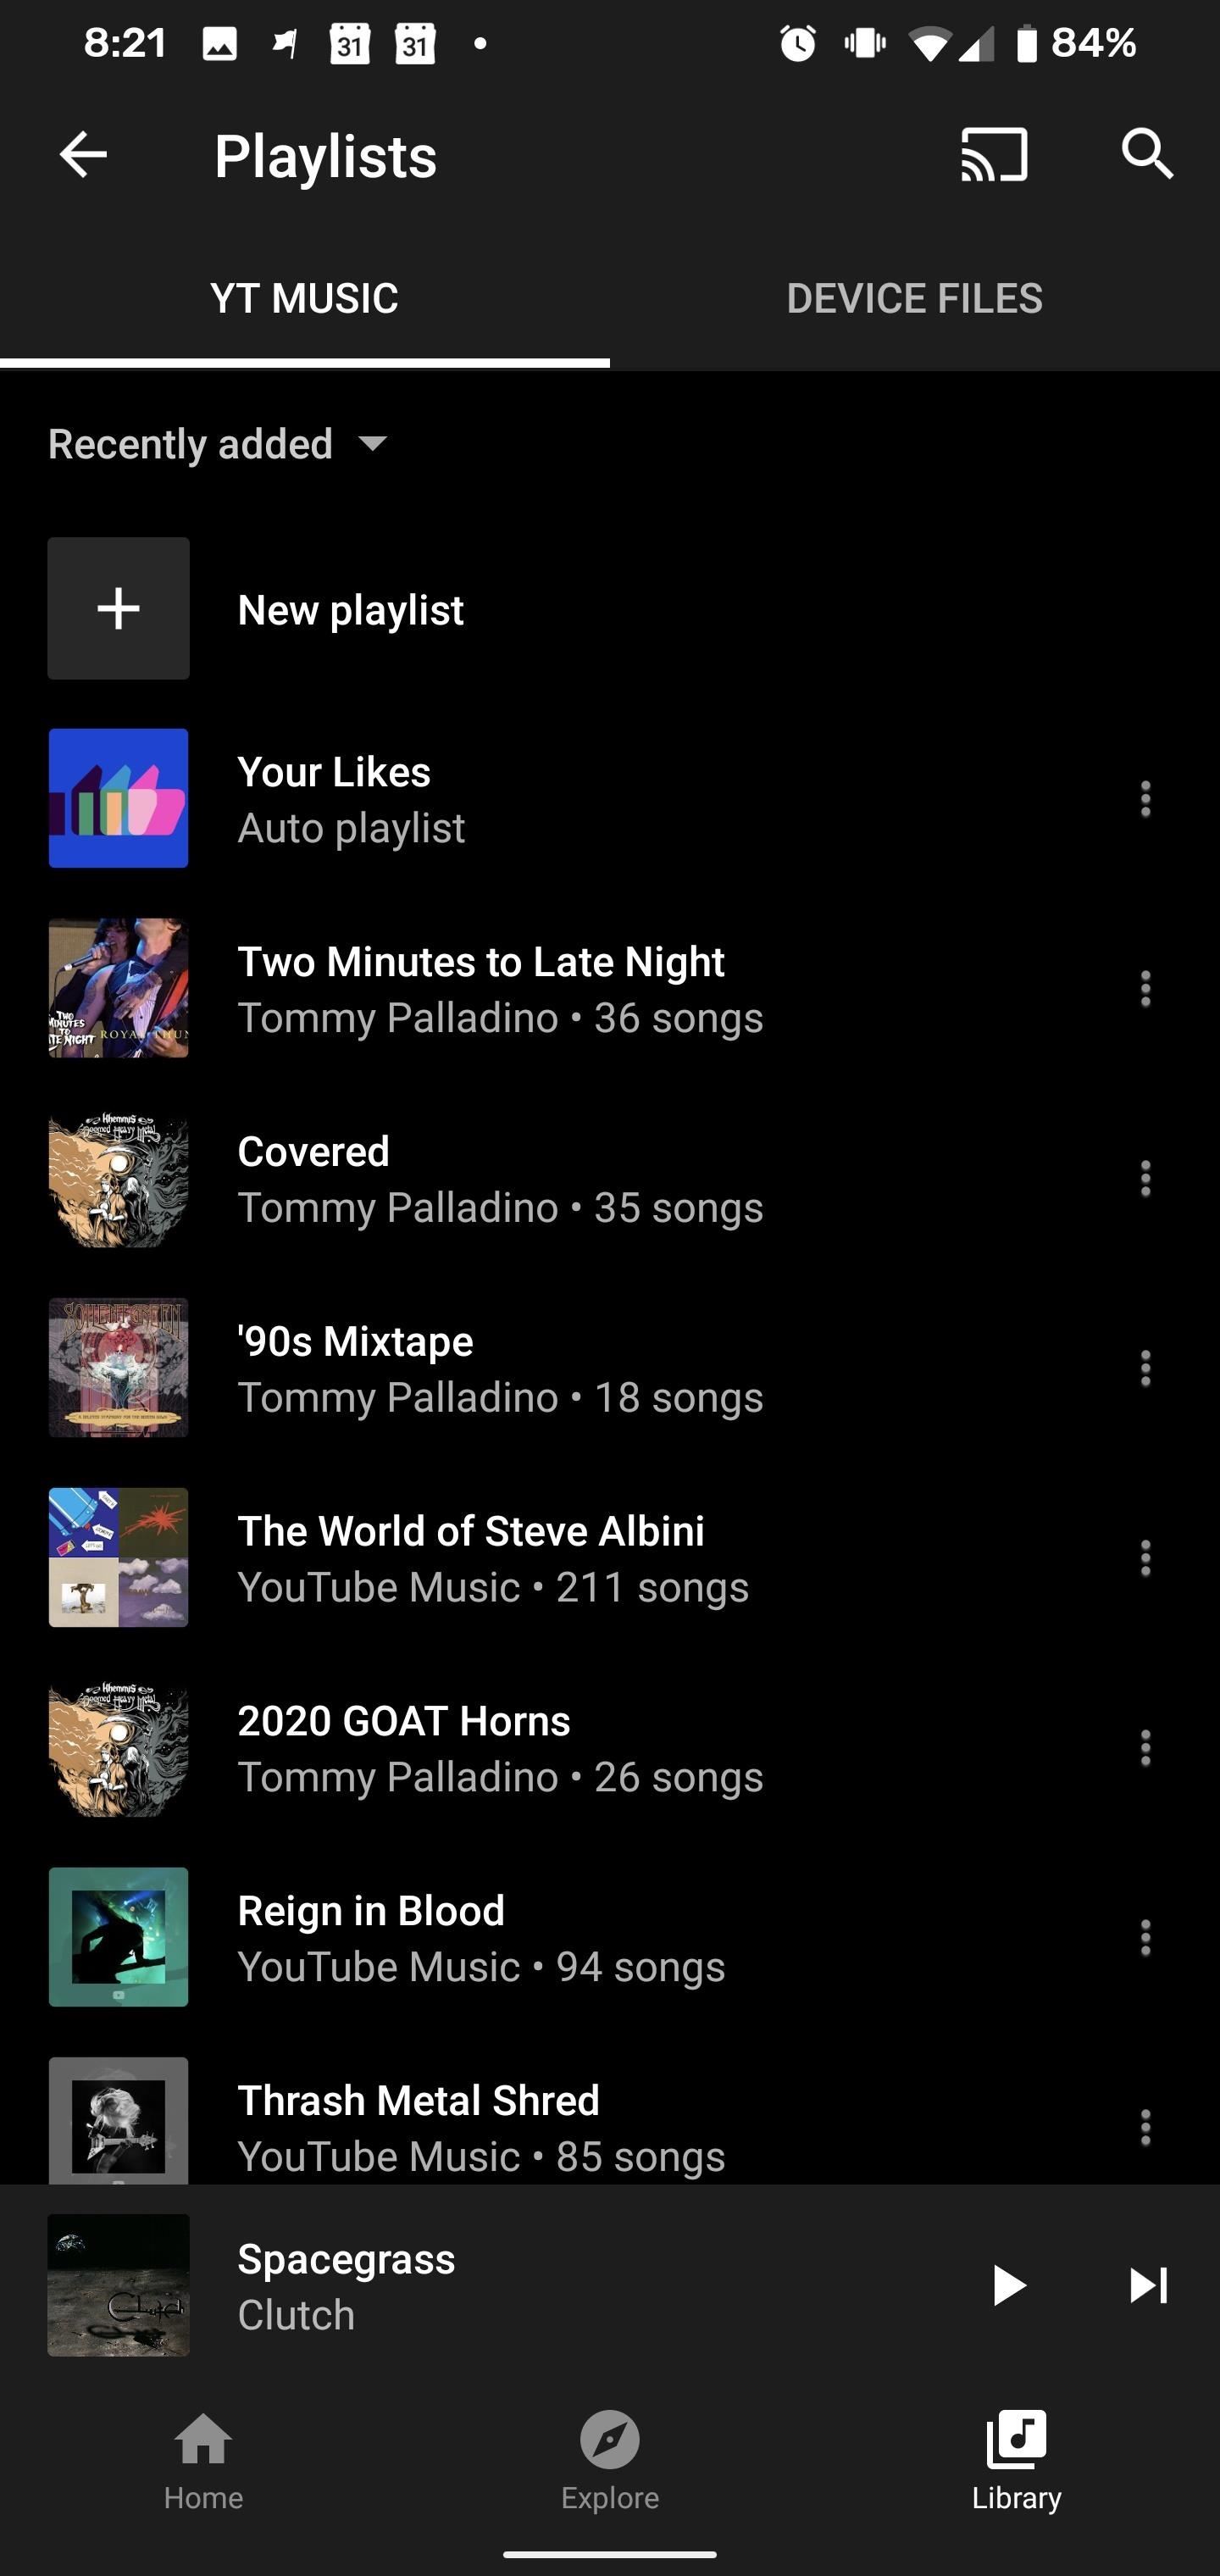 How to Make Collaborative YouTube Music Playlists That Your Friends Can Add Tracks To